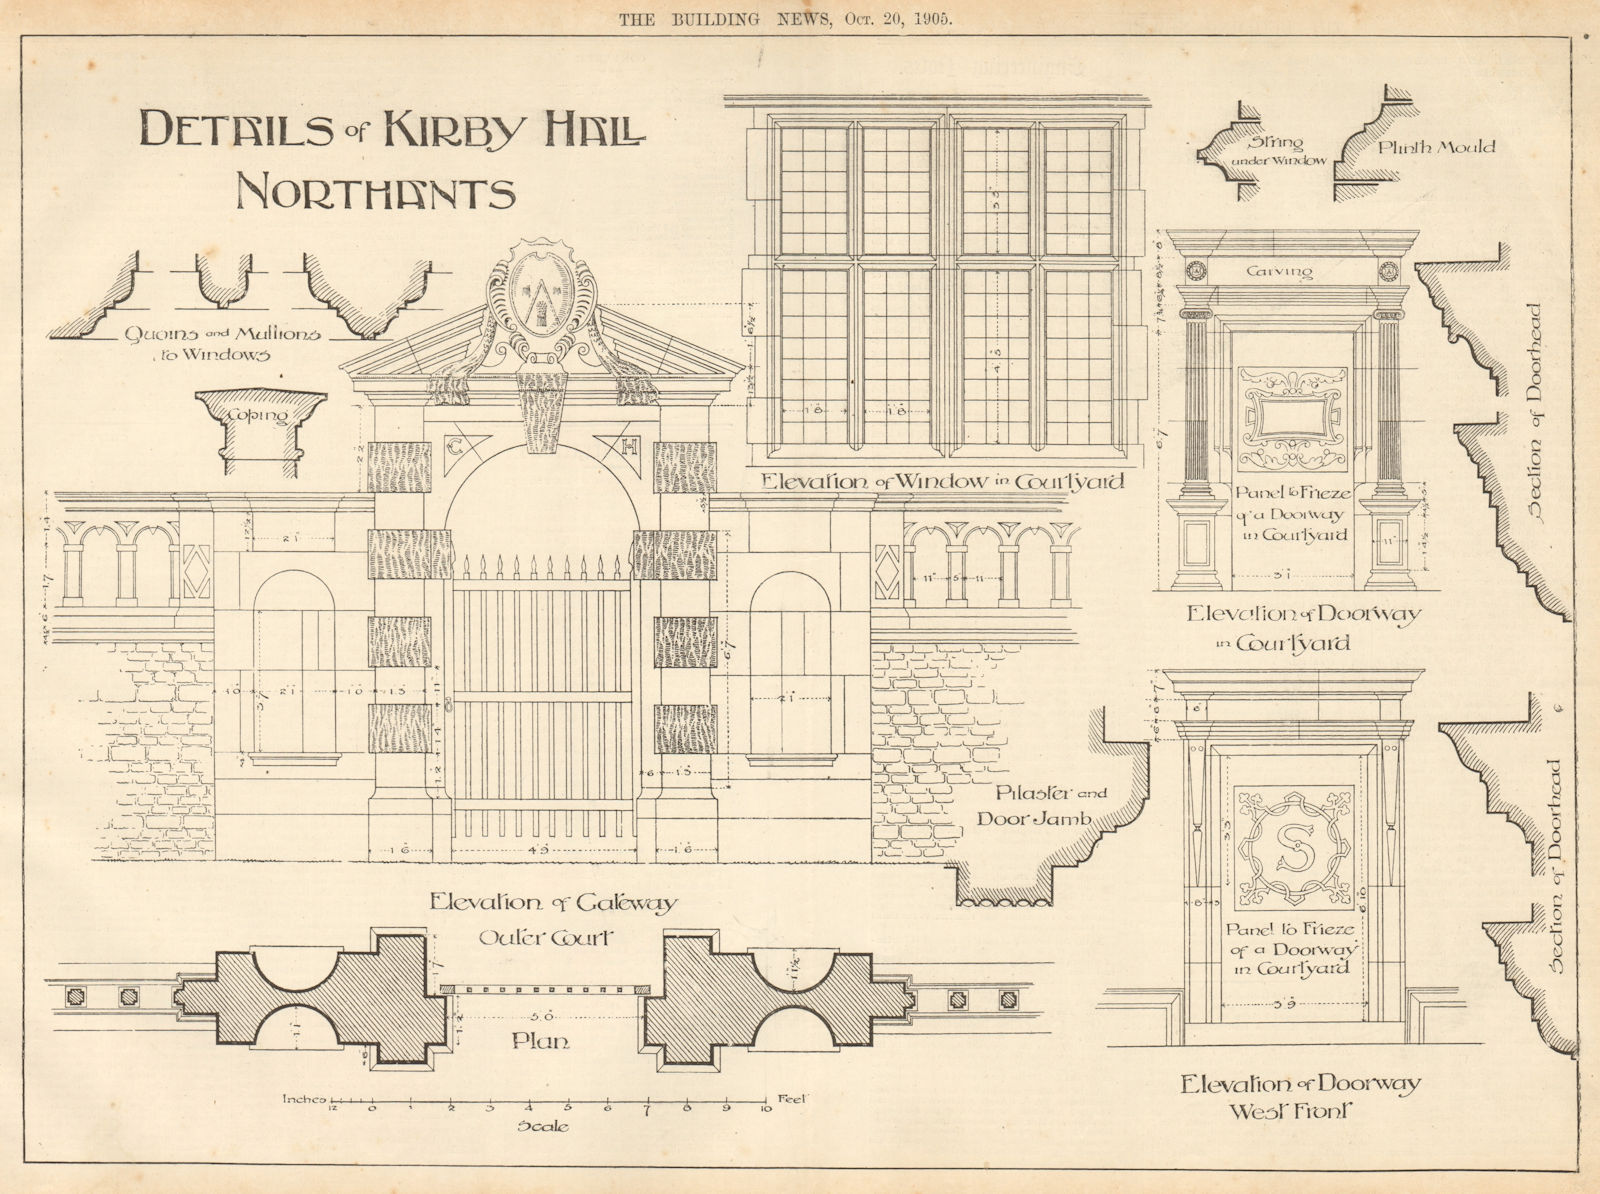 Associate Product Details of Kirby Hall, Northants. Elevations & plans. Northamptonshire 1905